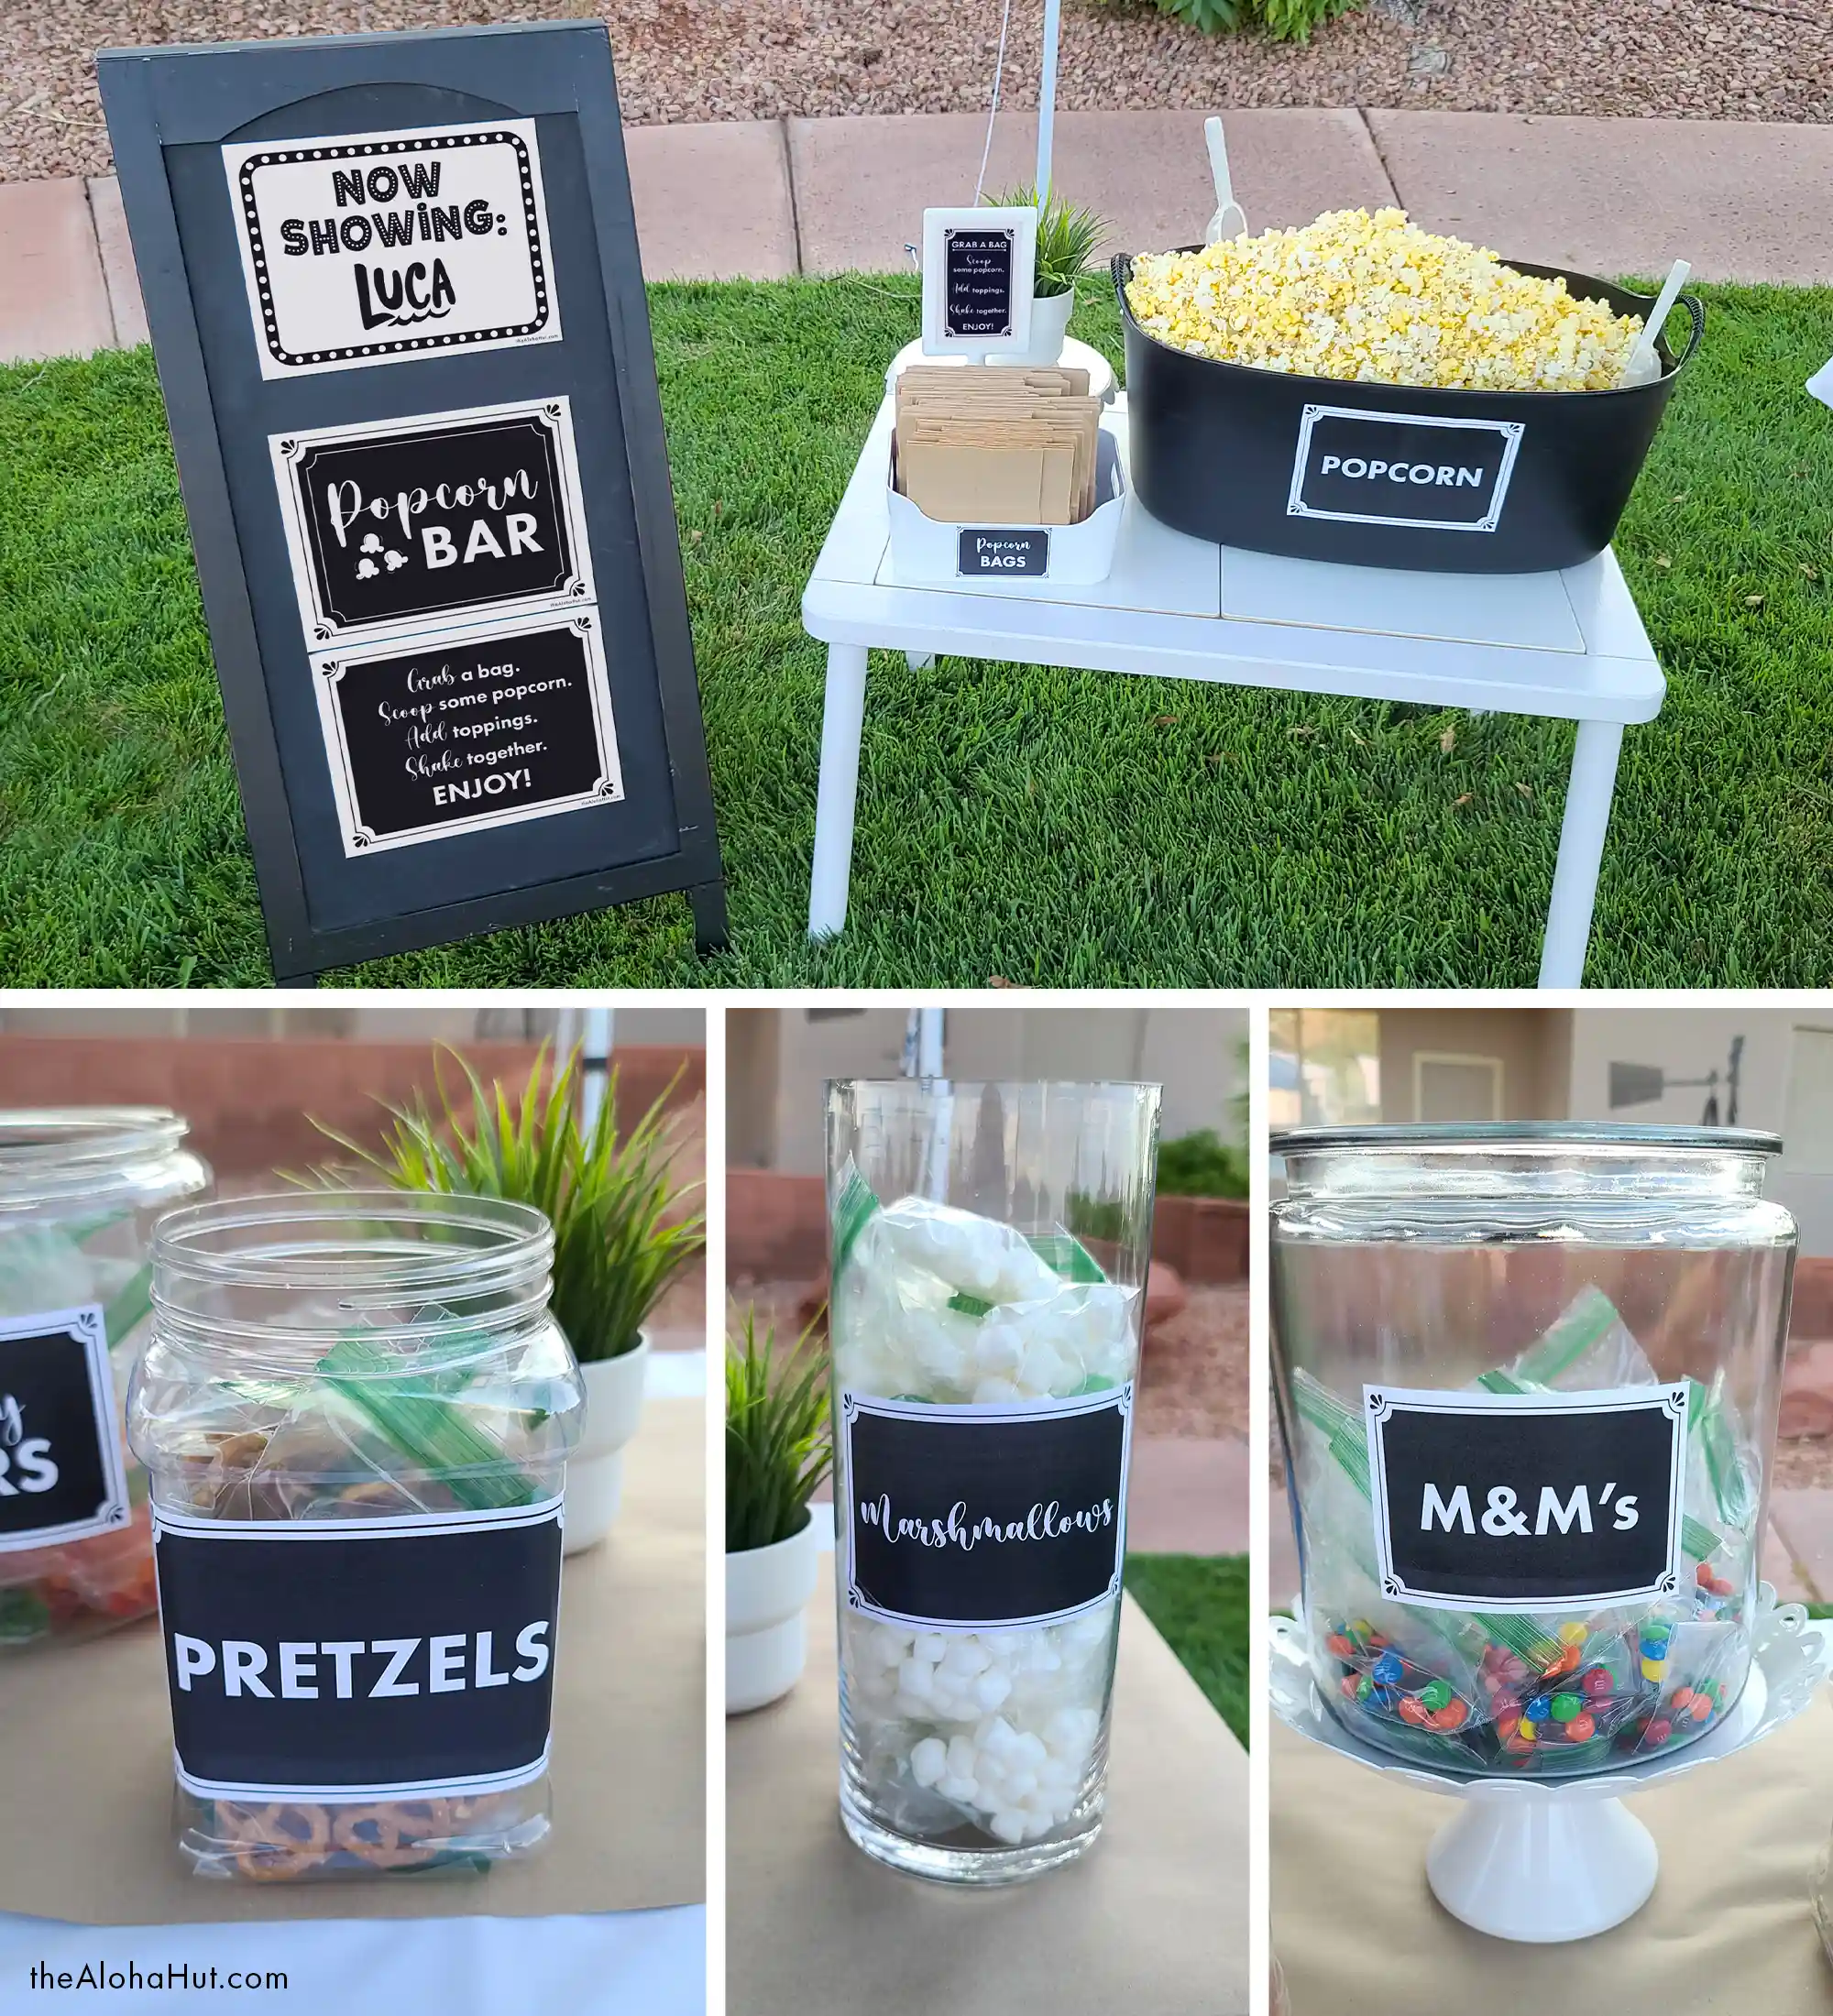 Popcorn Bar & Outdoor Movie Signs and Decor